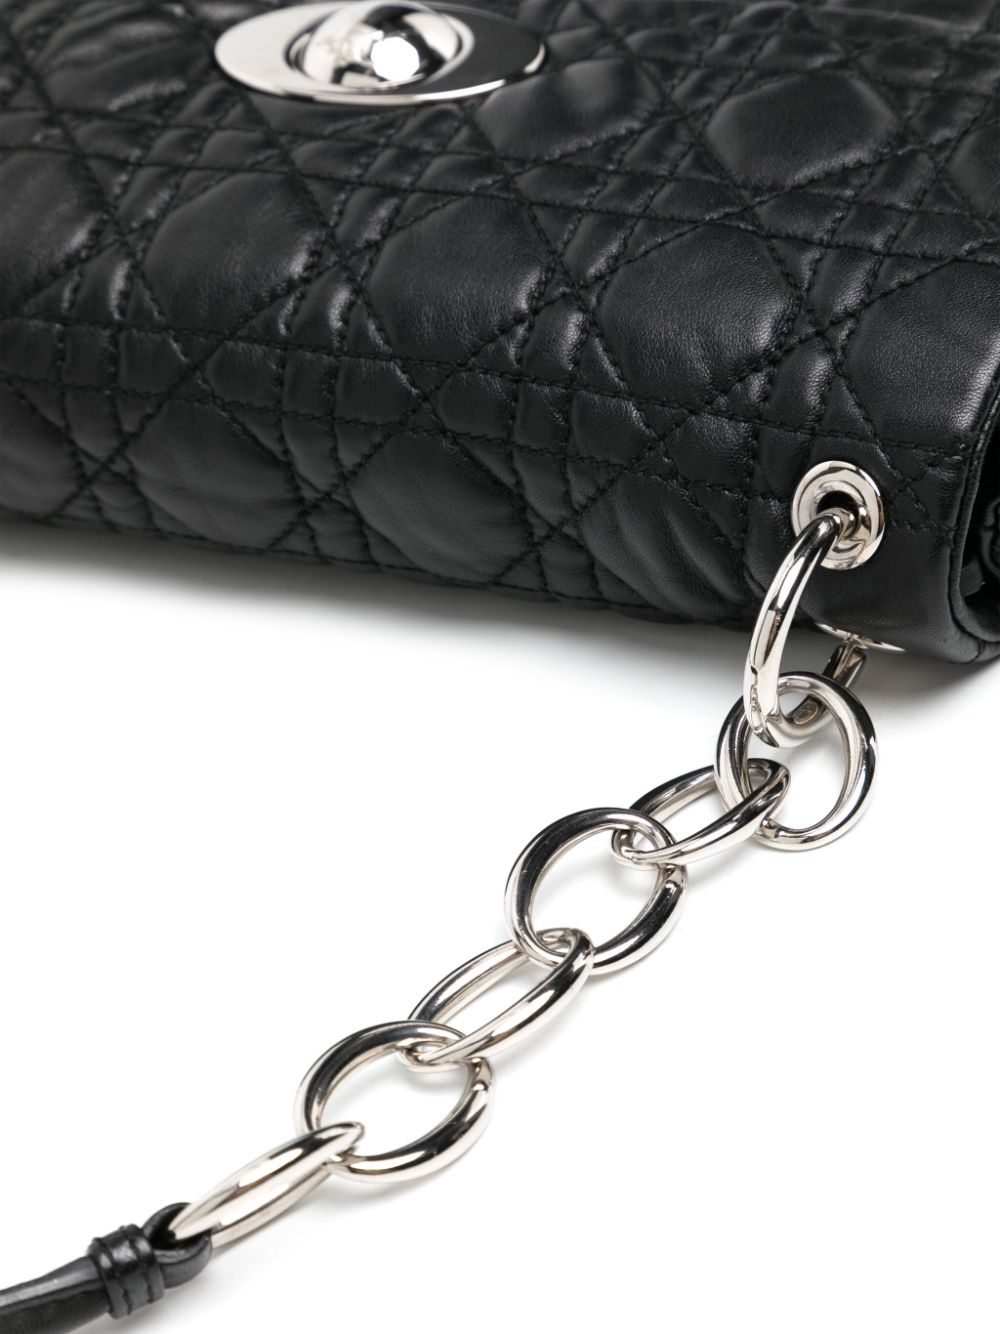 Christian Dior Quilted Patent Leather Lady Dior Clutch Bag